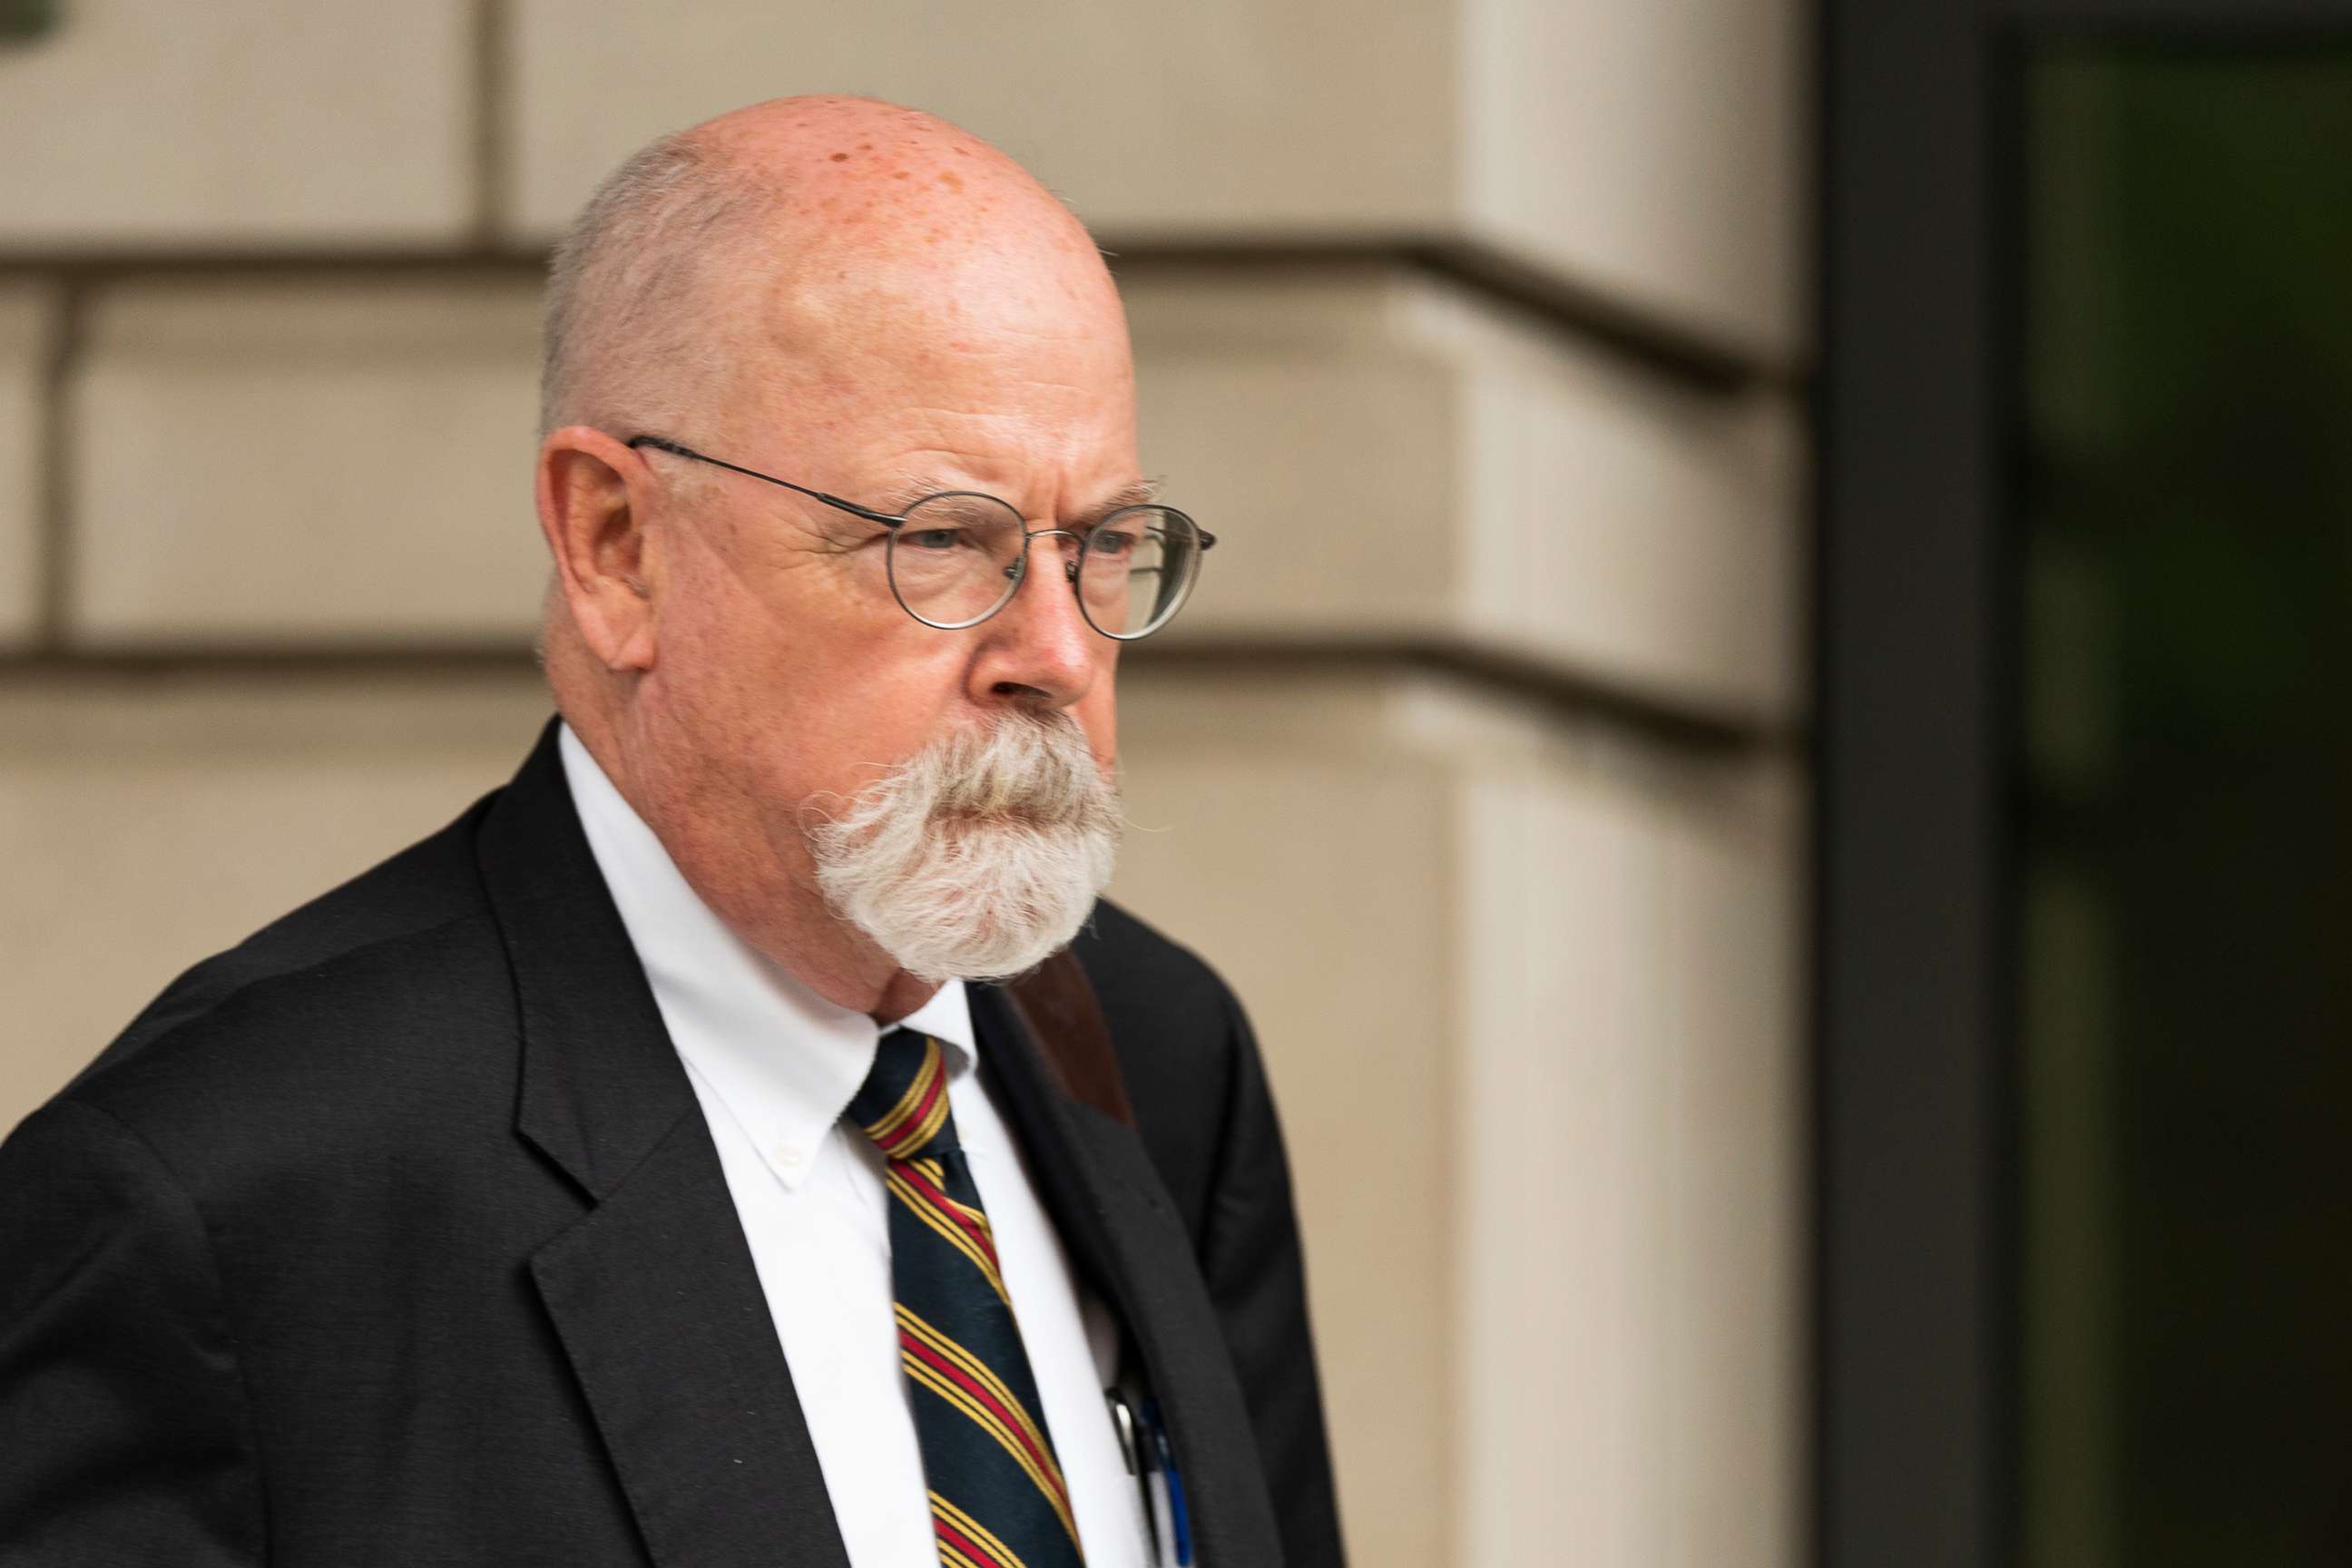 PHOTO: Special counsel John Durham, the prosecutor appointed to investigate potential government wrongdoing in the early days of the Trump-Russia probe, leaves federal court in Washington, D.C., May 16, 2022.